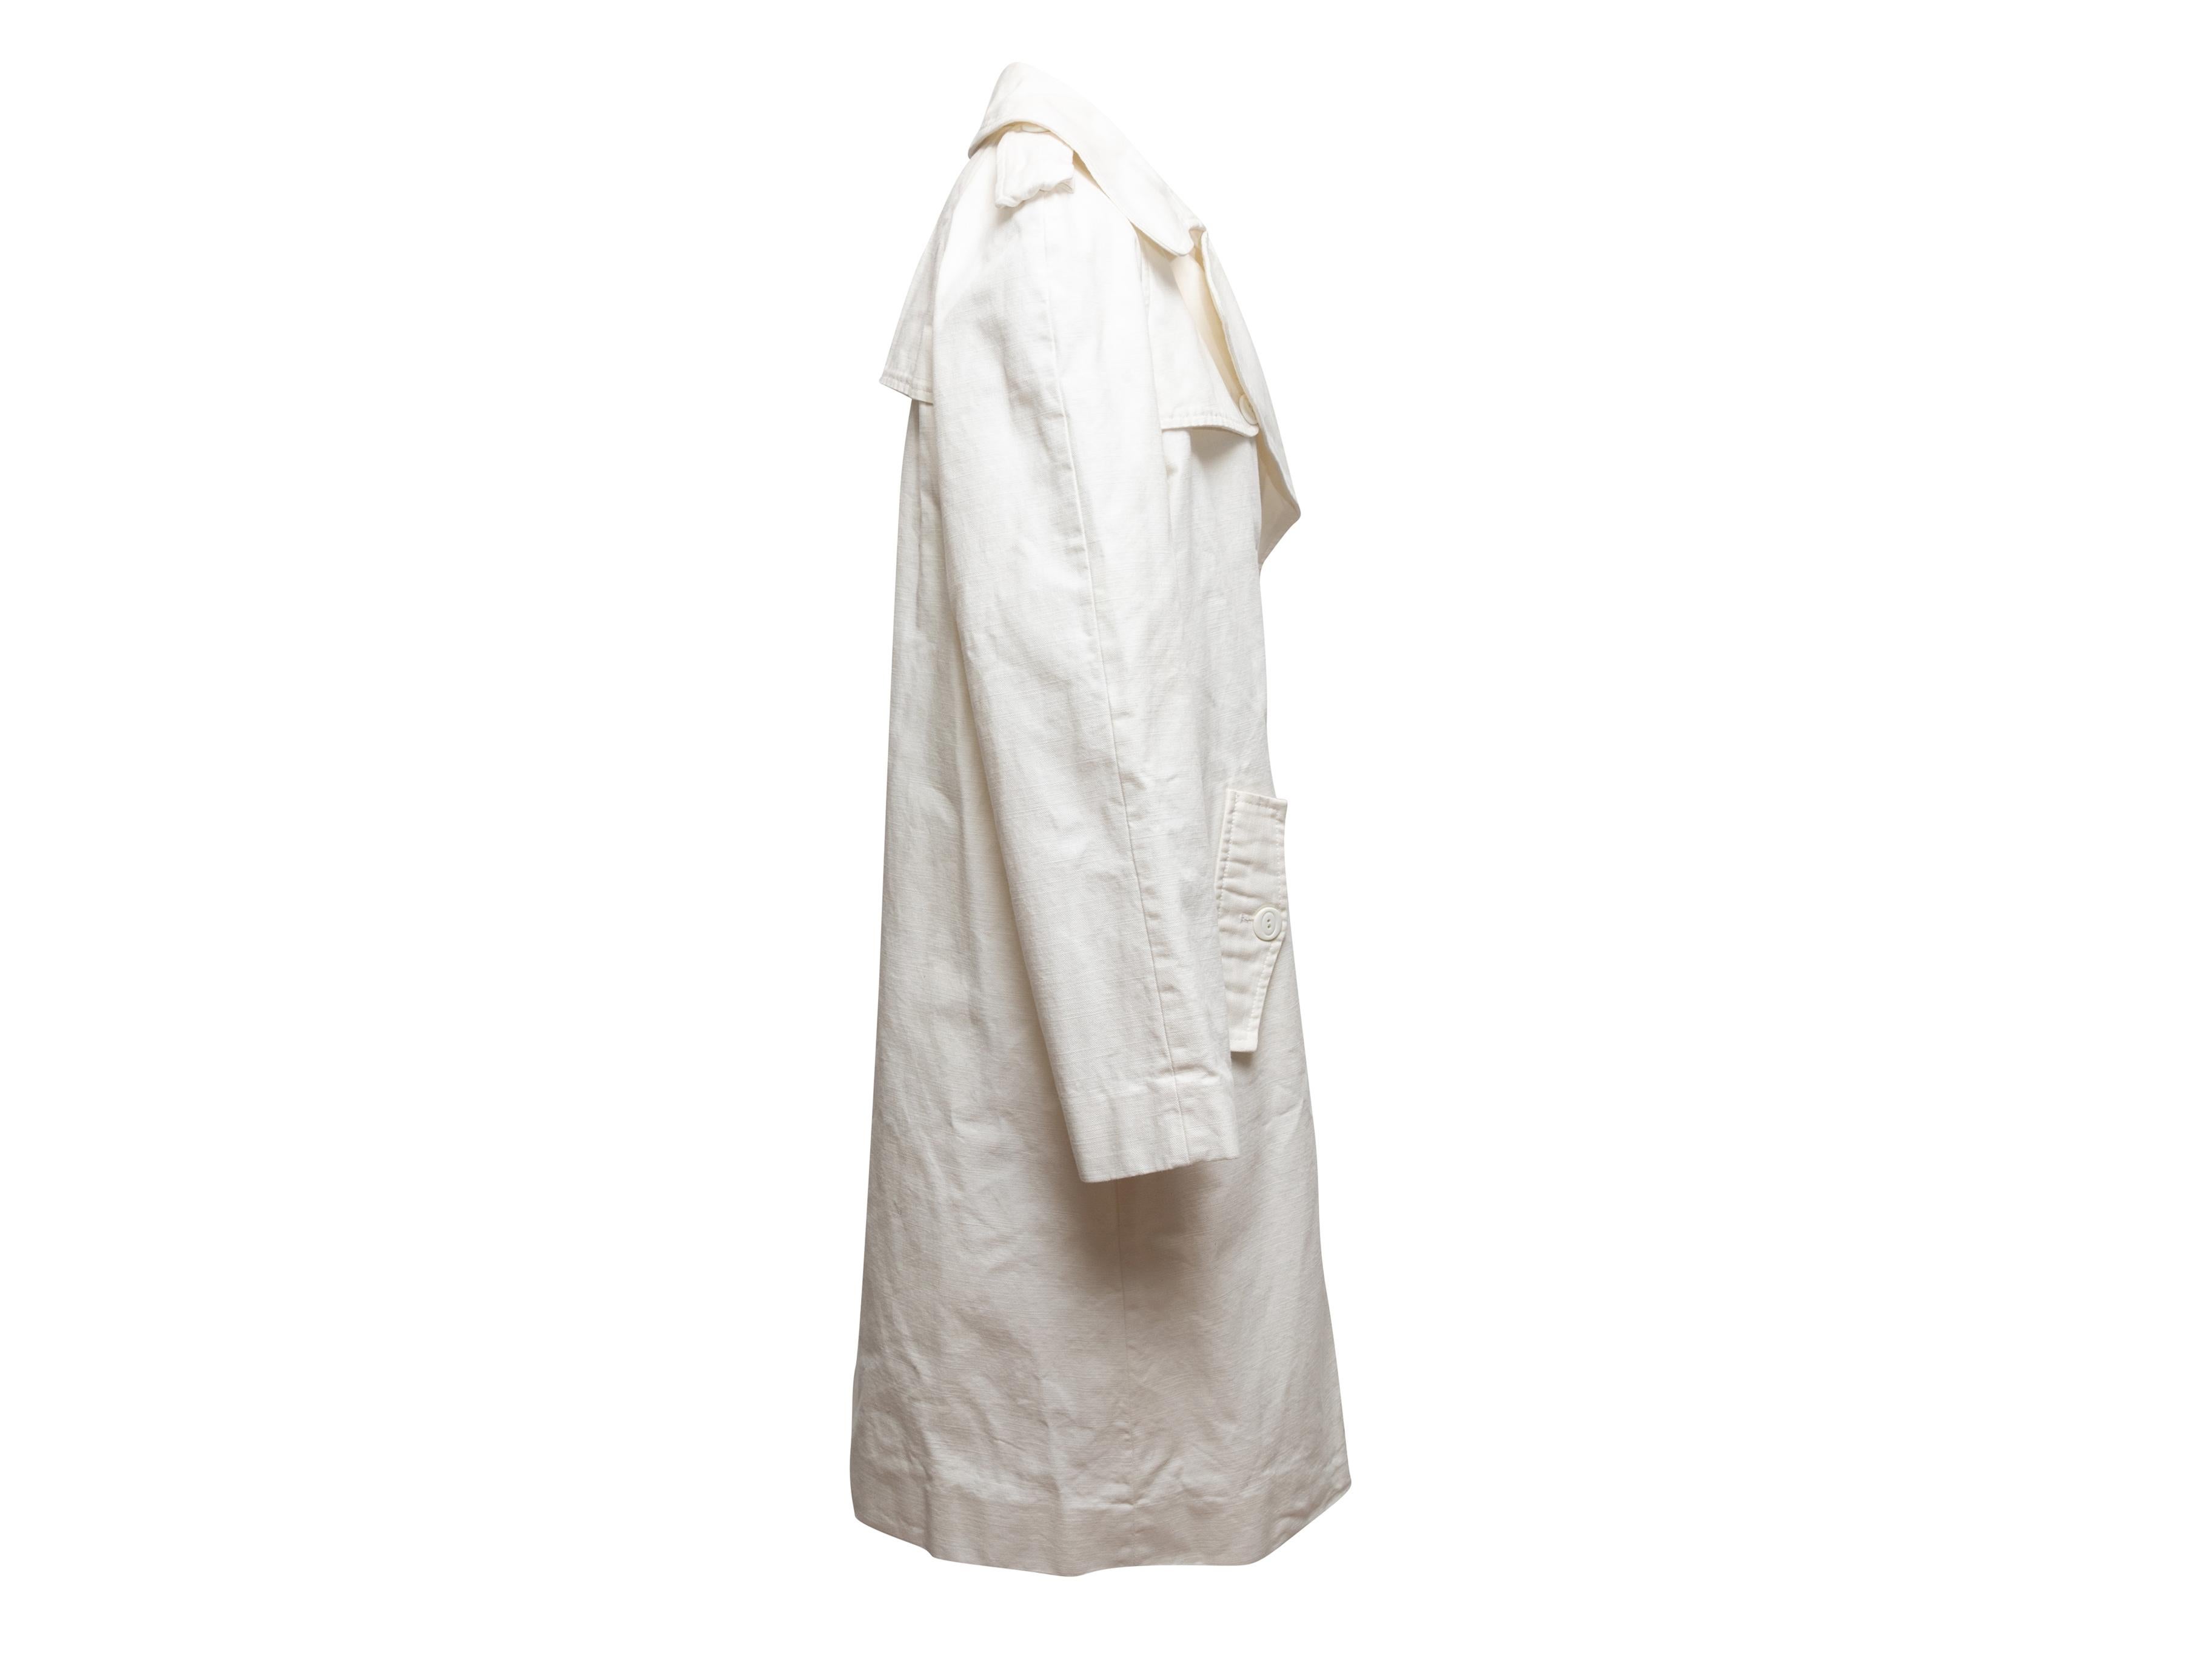 D&G Trench-coat blanc, taille IT 44 1